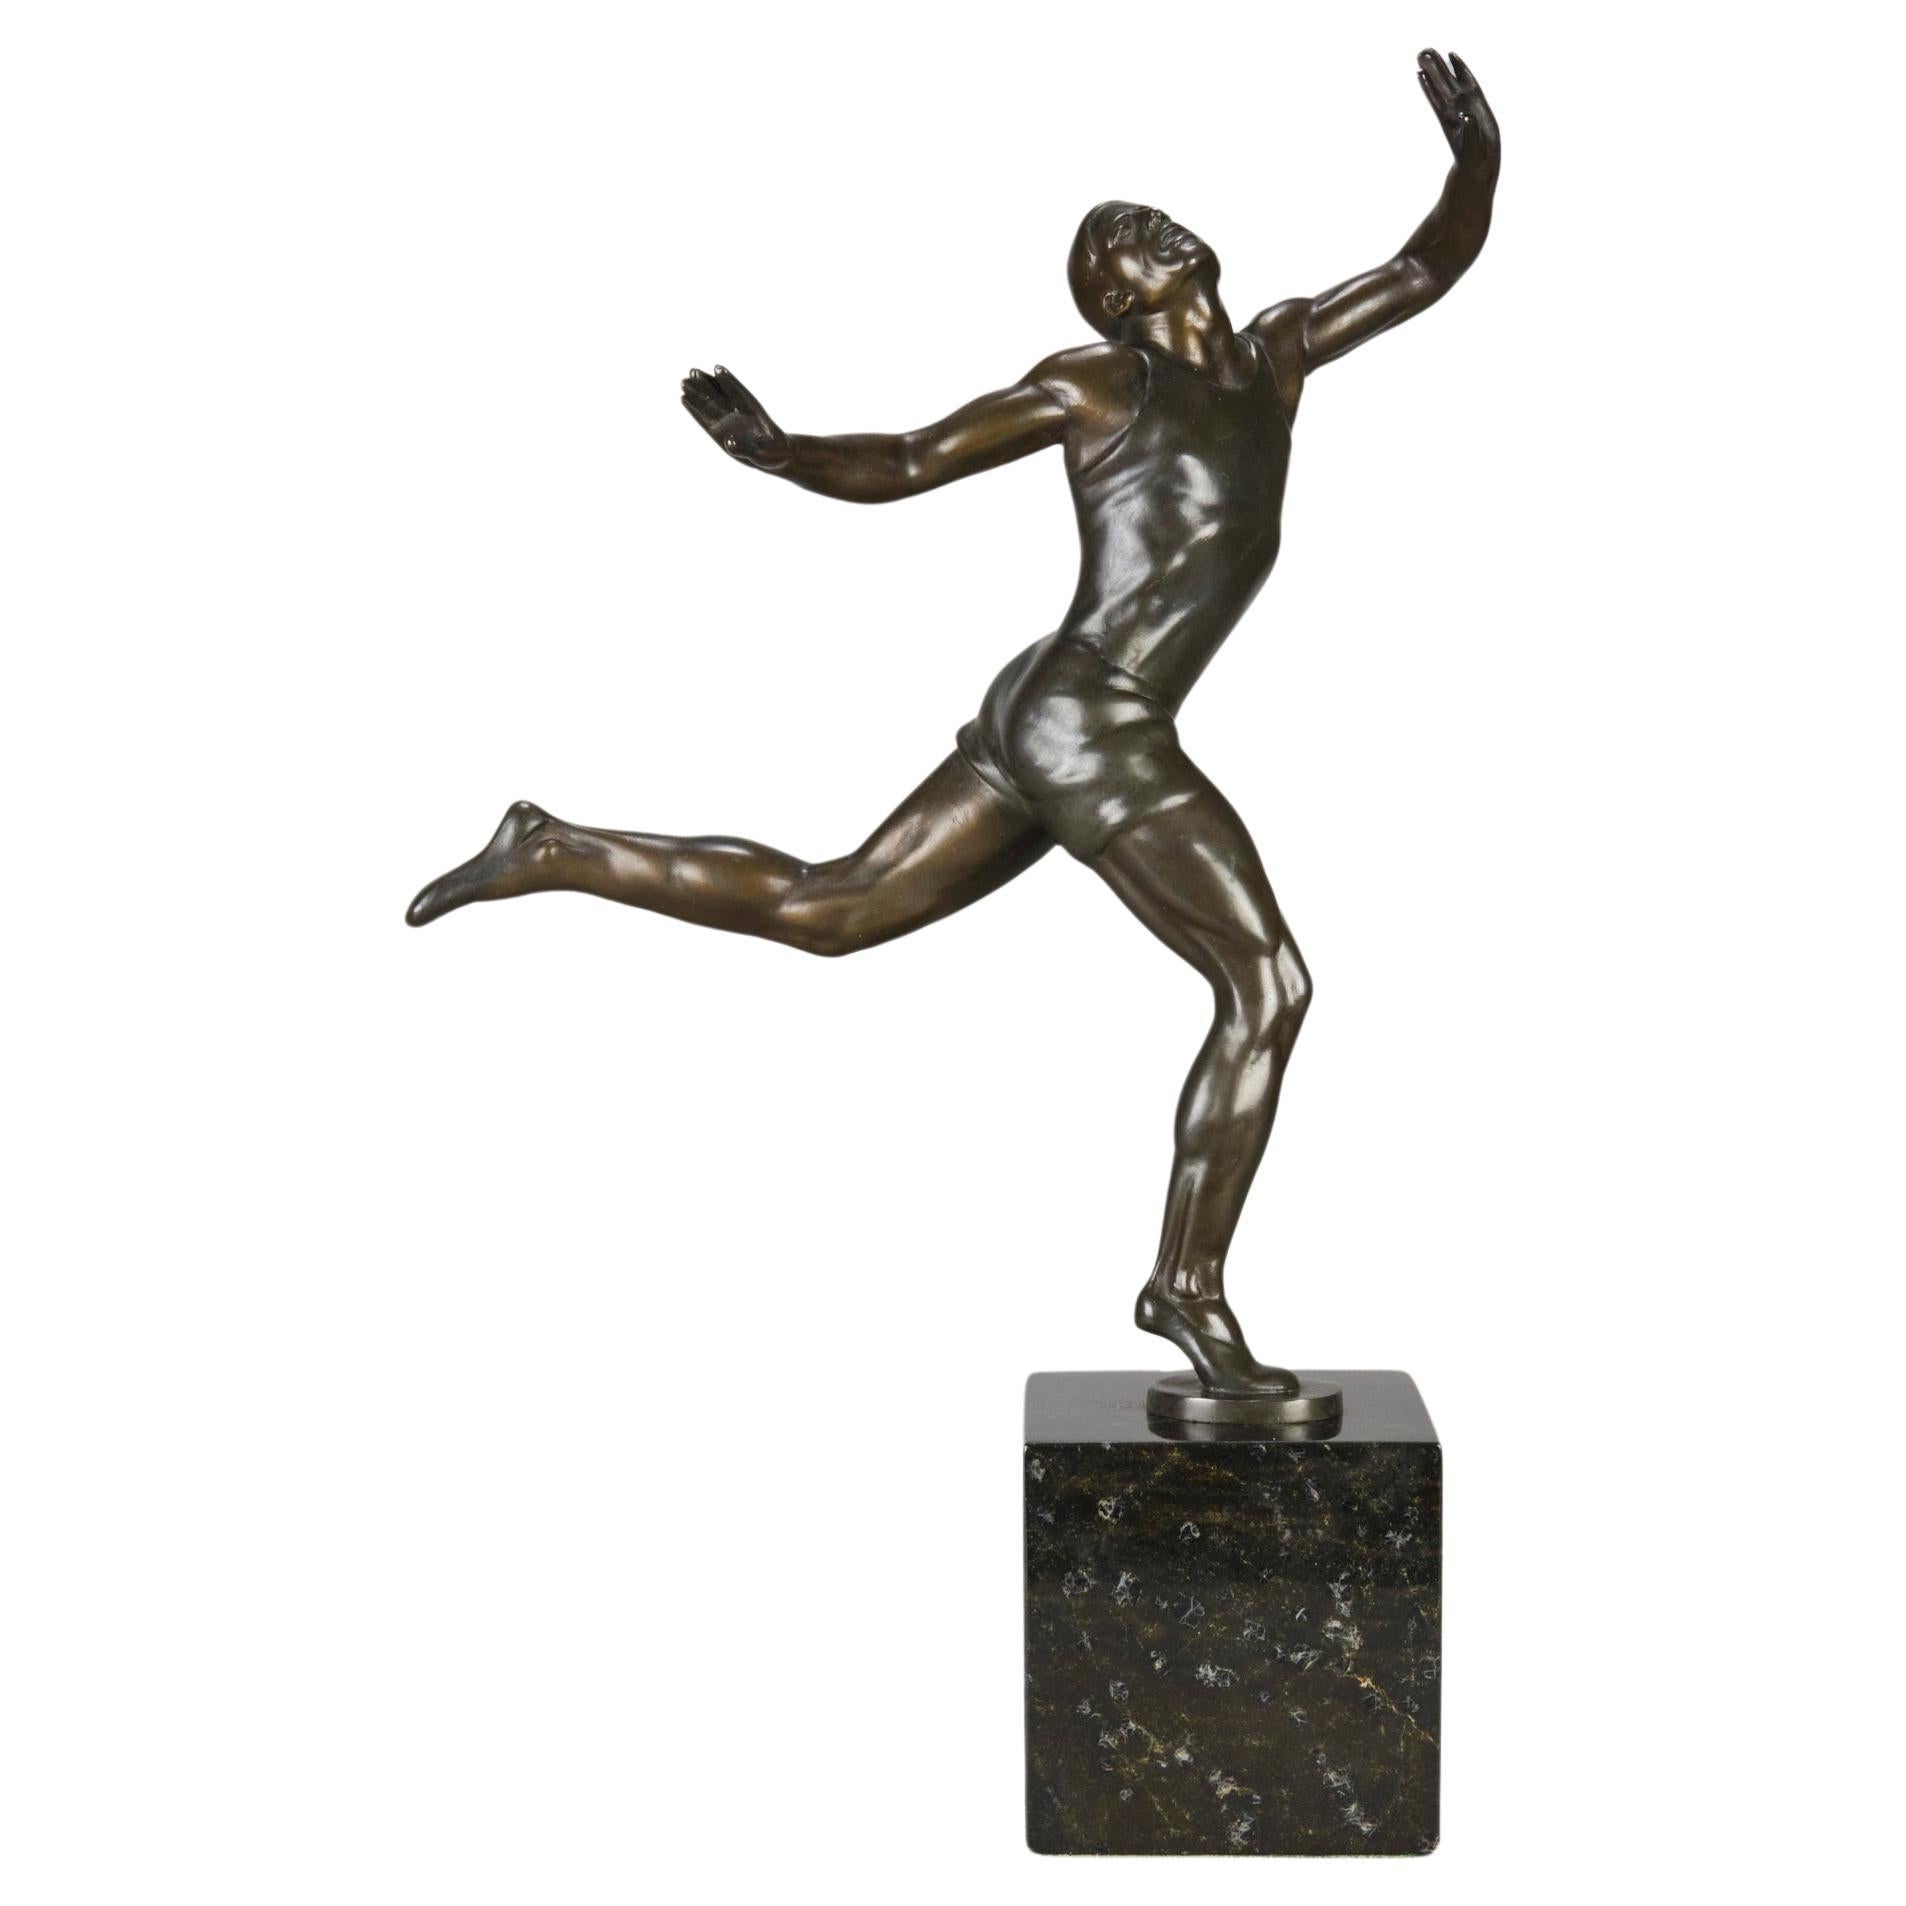 Early 20th Century Bronze Sculpture entitled "Olympian" by Ernest Becker